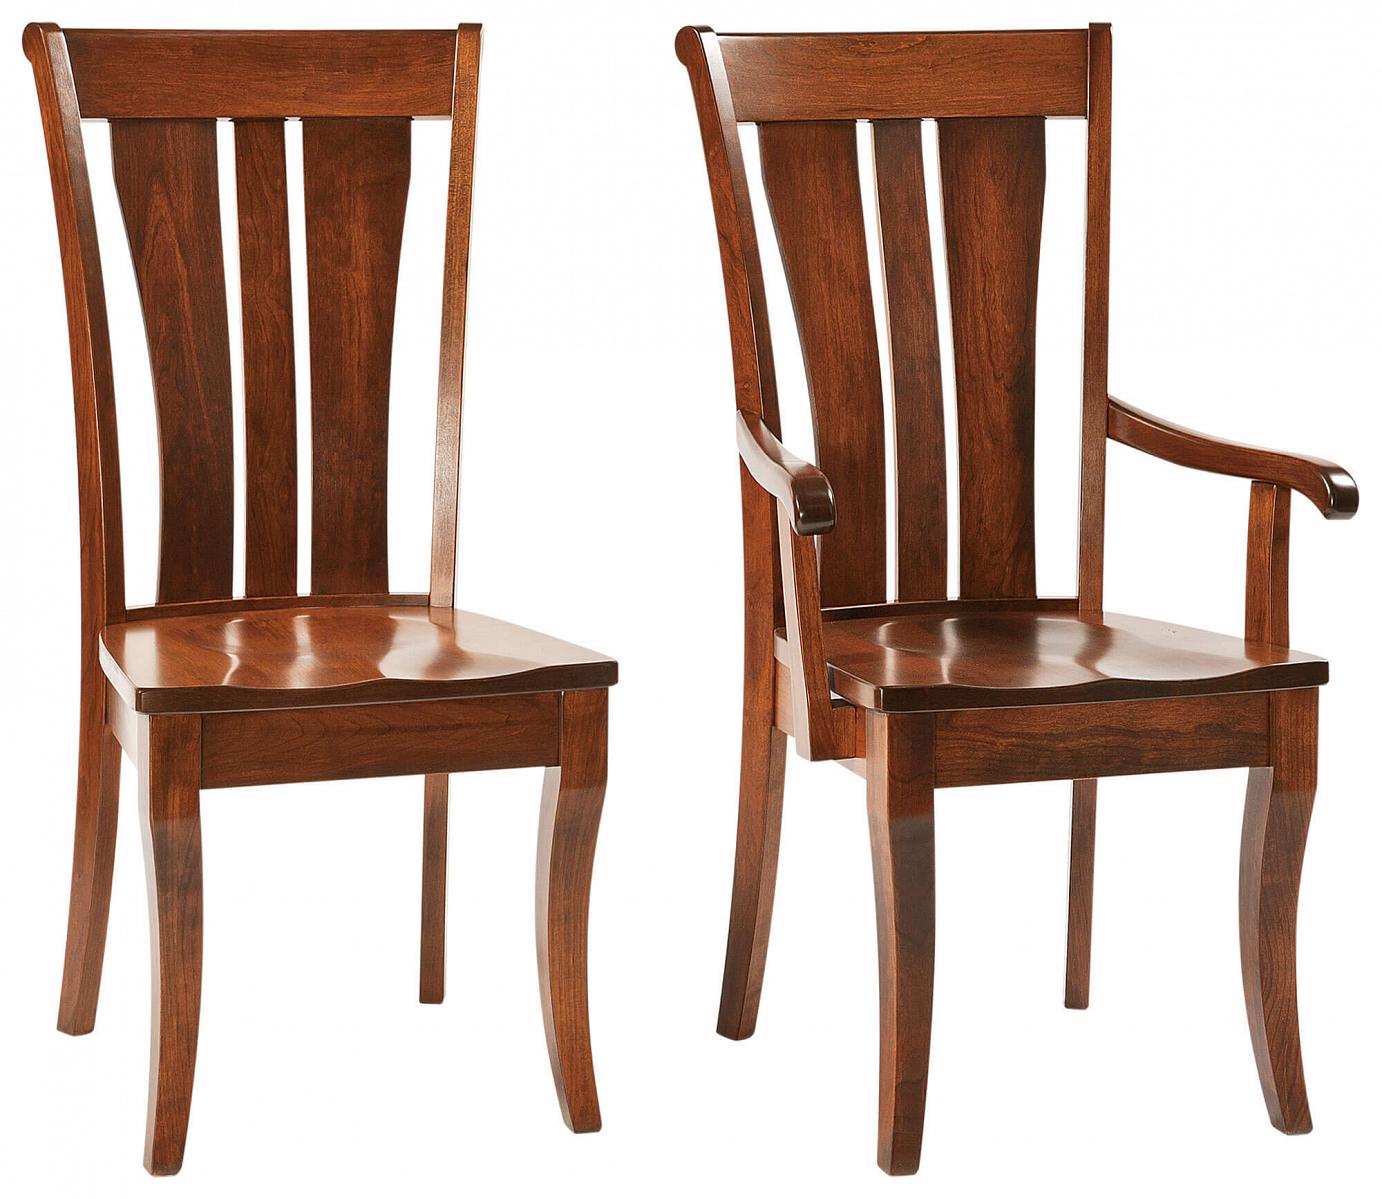 RH Yoder Fenmore Chairs